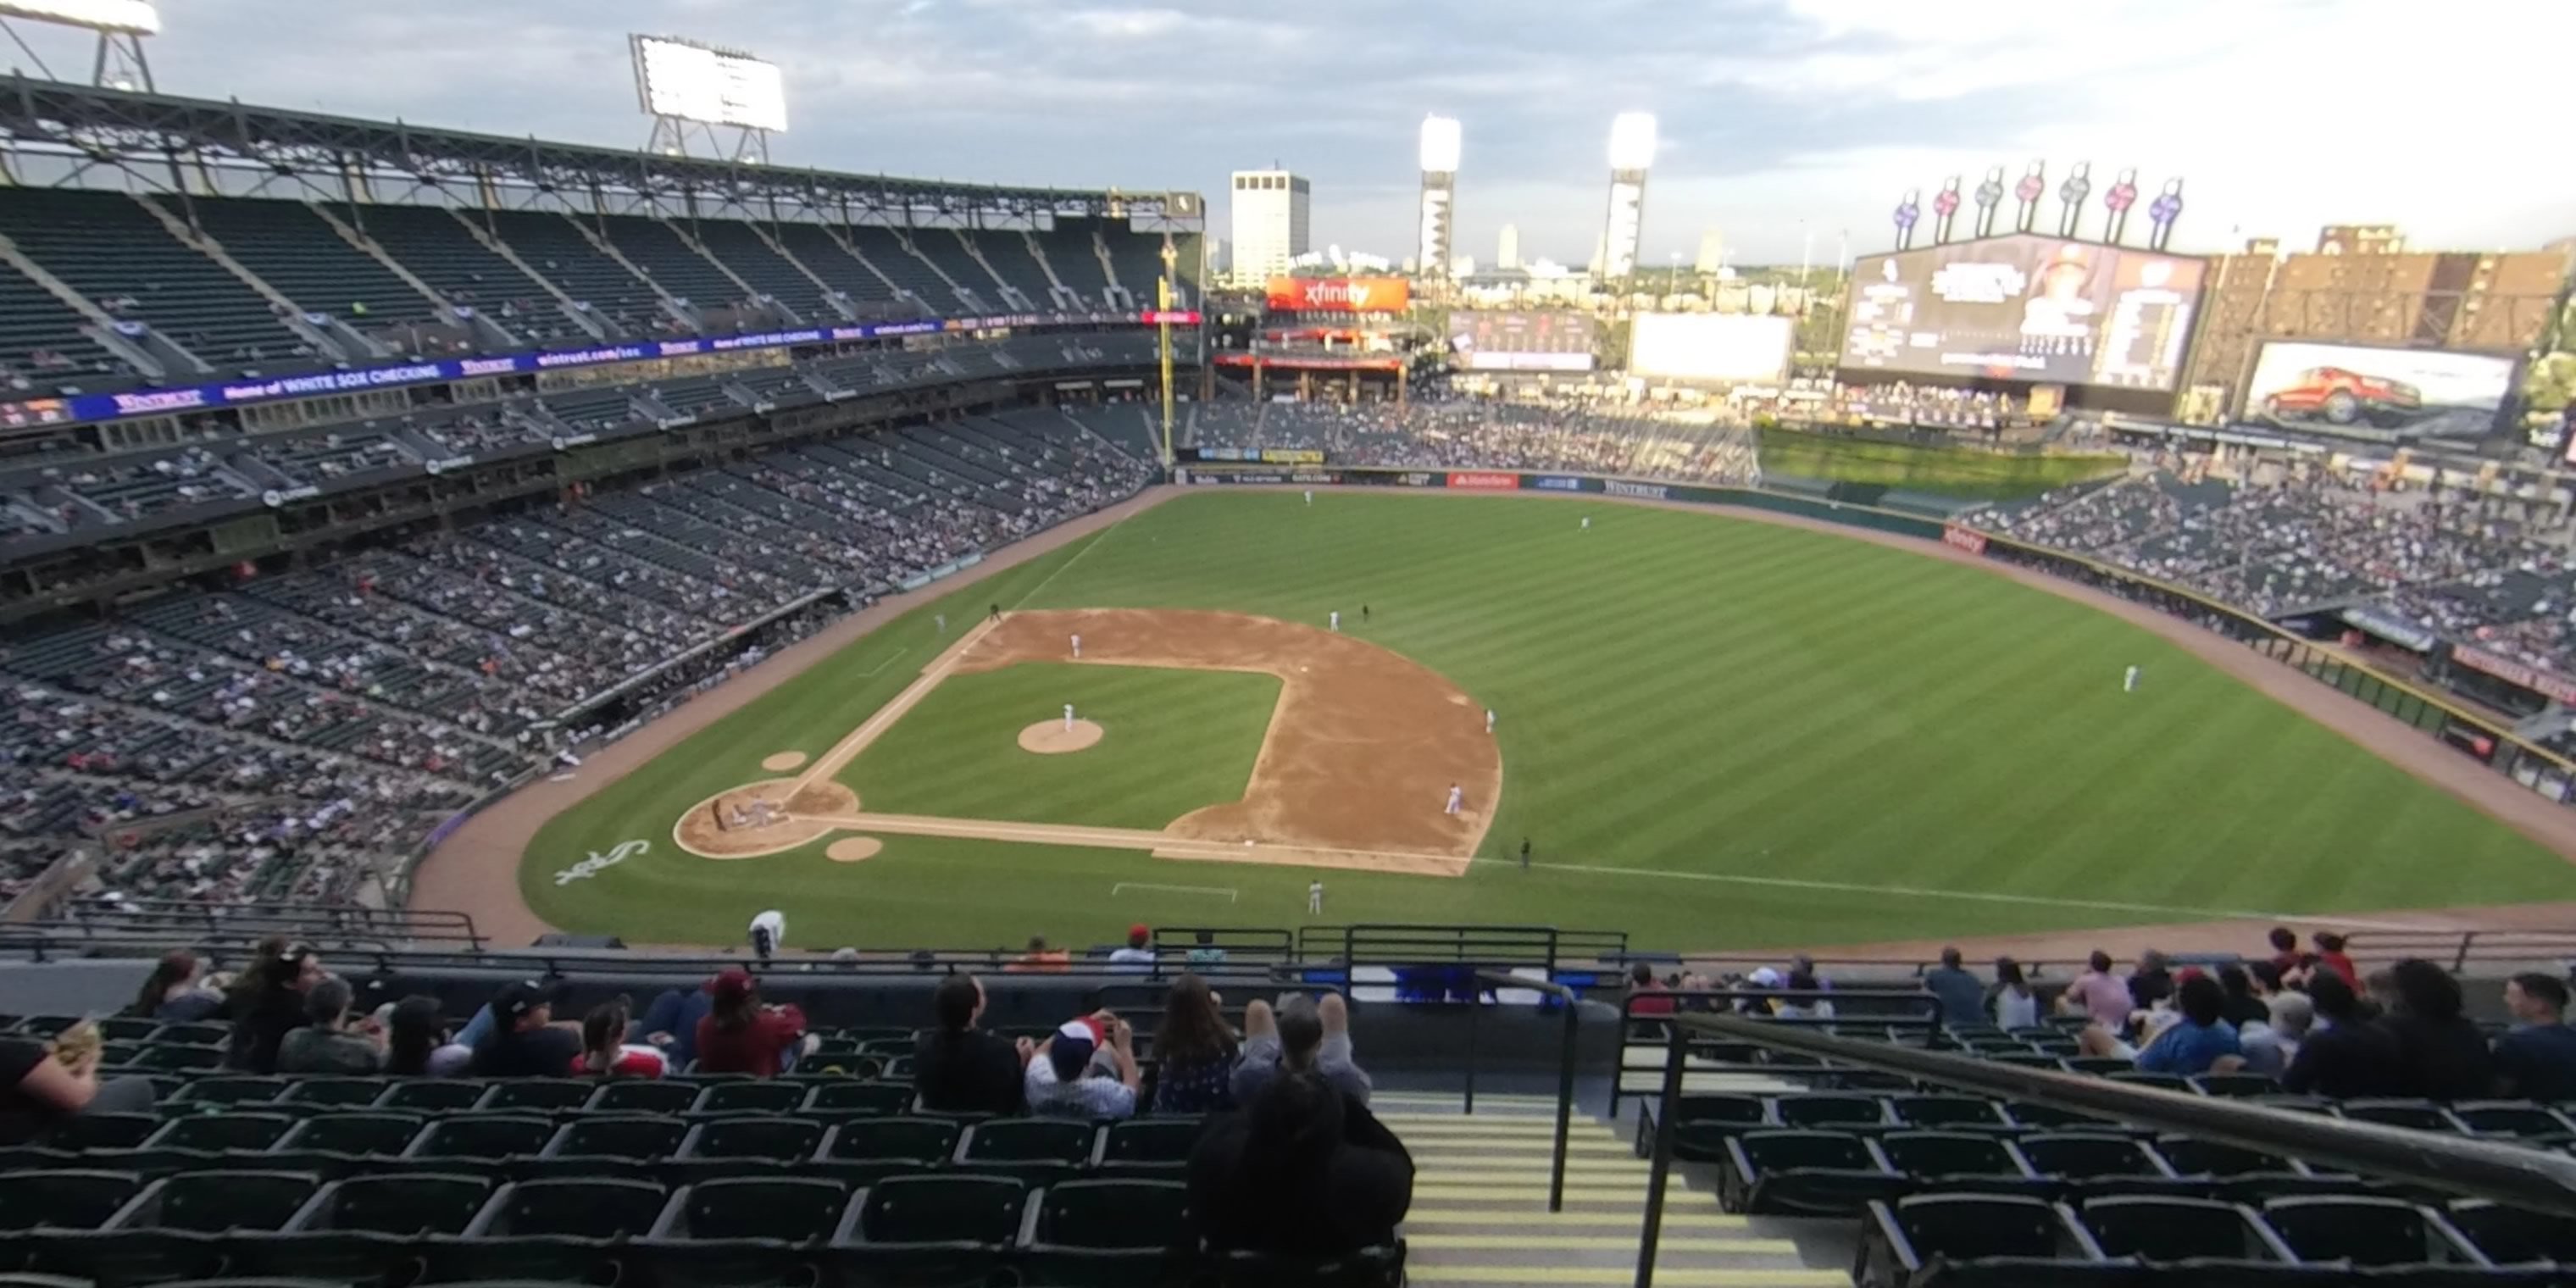 section 522 panoramic seat view  - guaranteed rate field